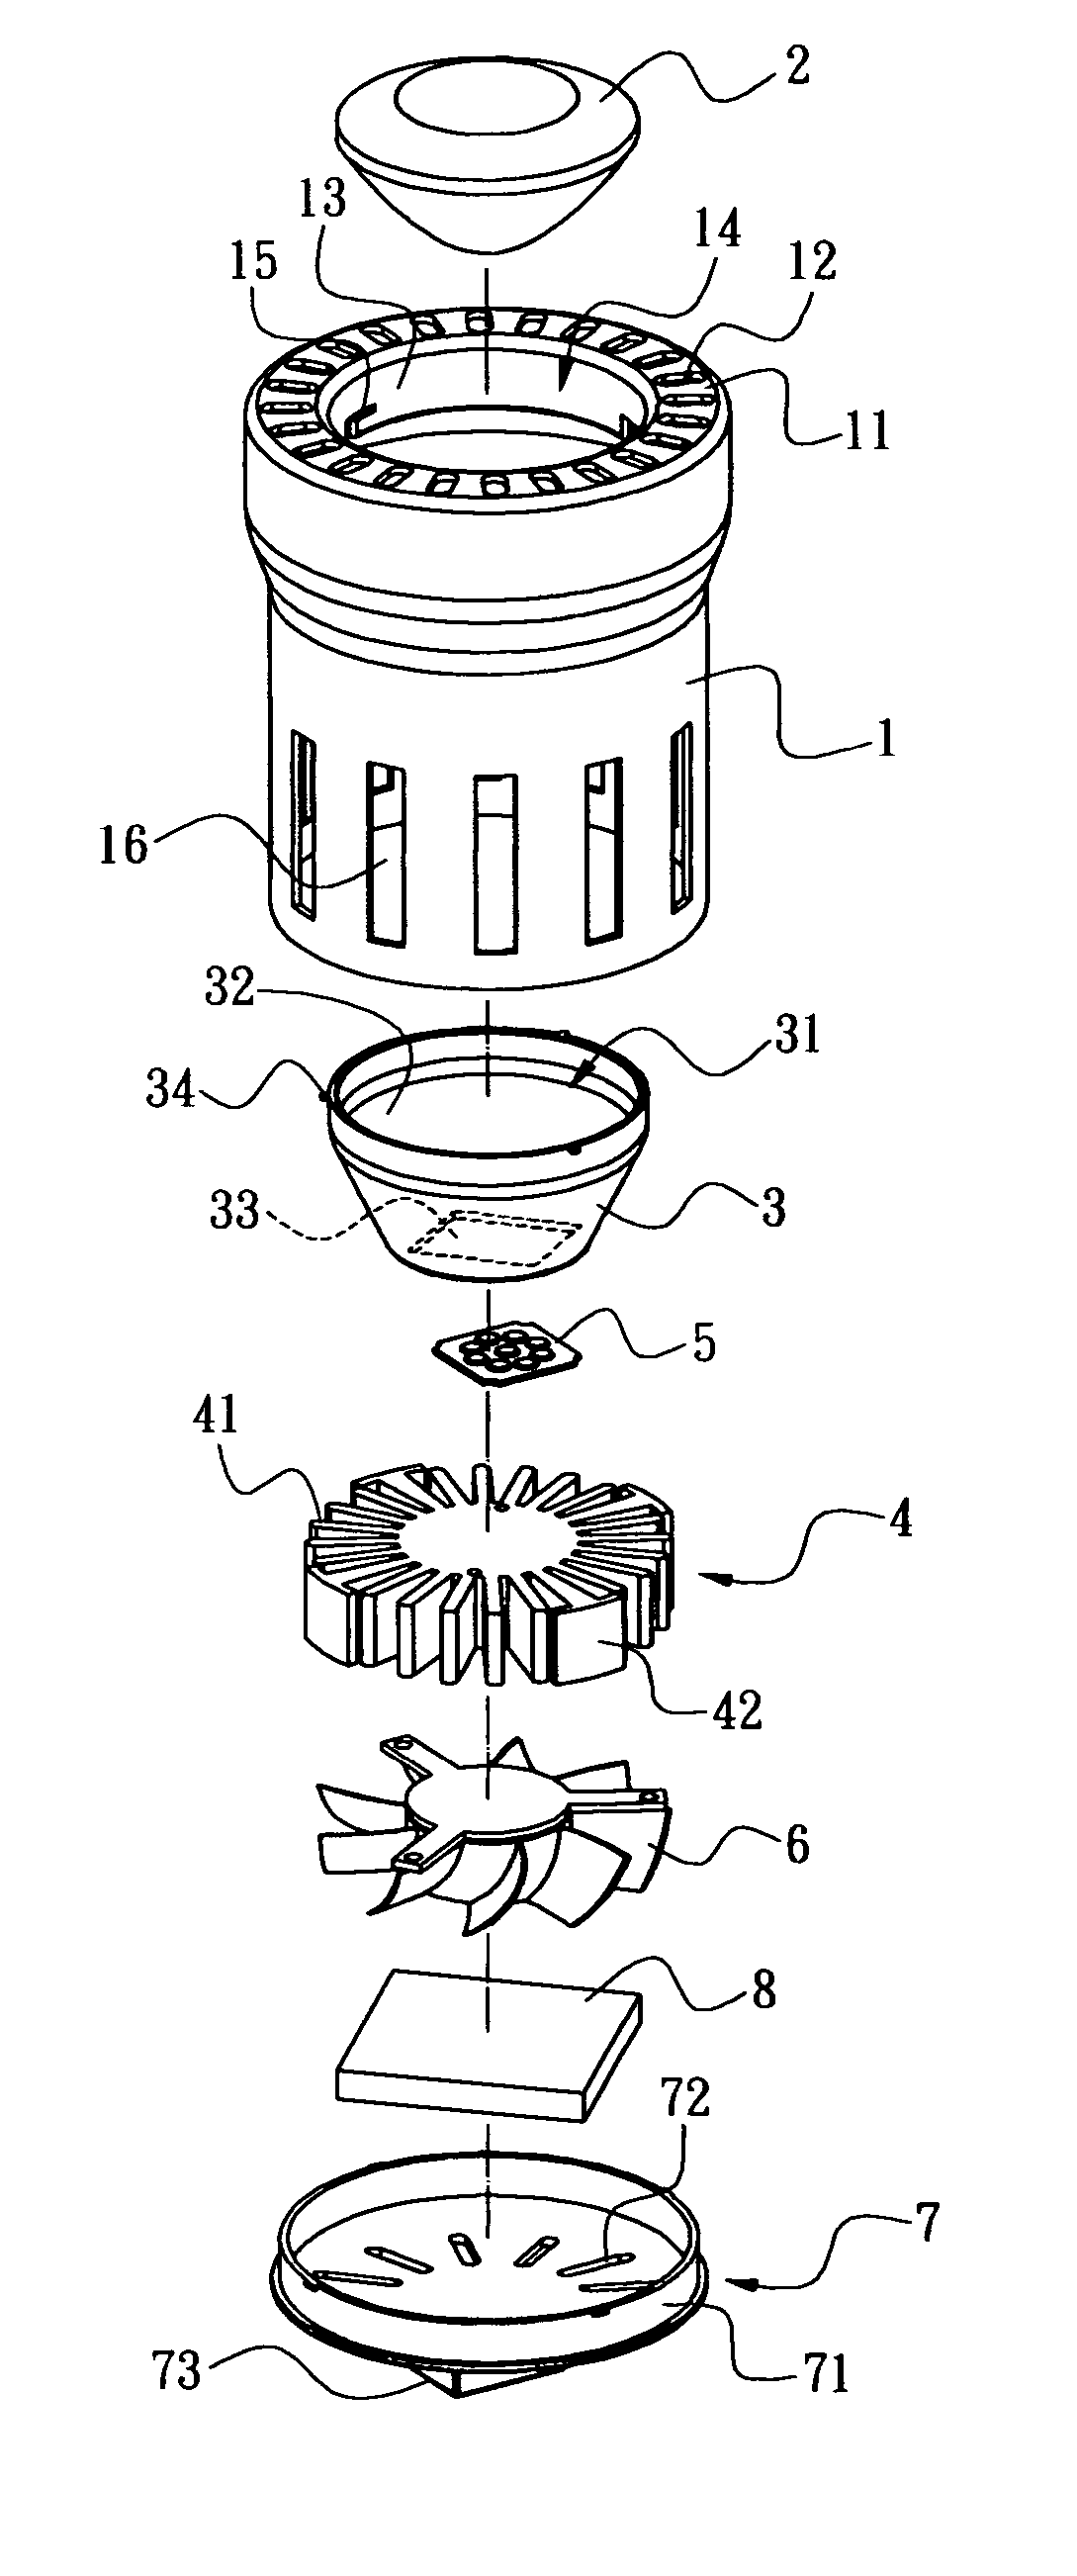 Heat dissipating apparatus for lighting utility